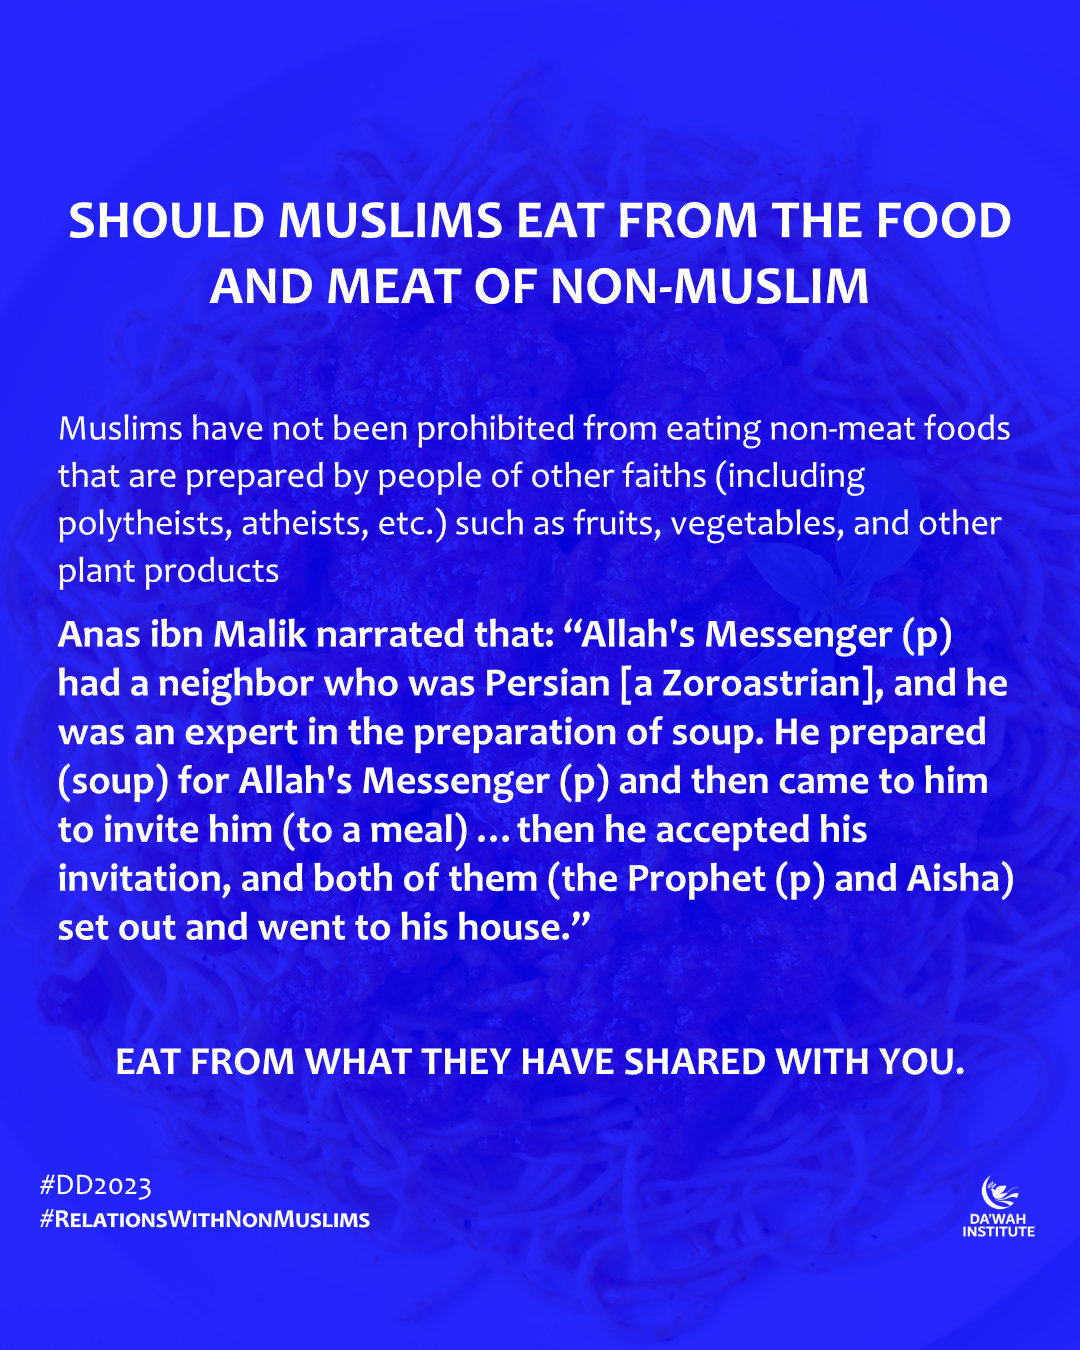 SHOULD MUSLIMS EAT FROM THE FOOD AND MEAT OF NON-MUSLIM